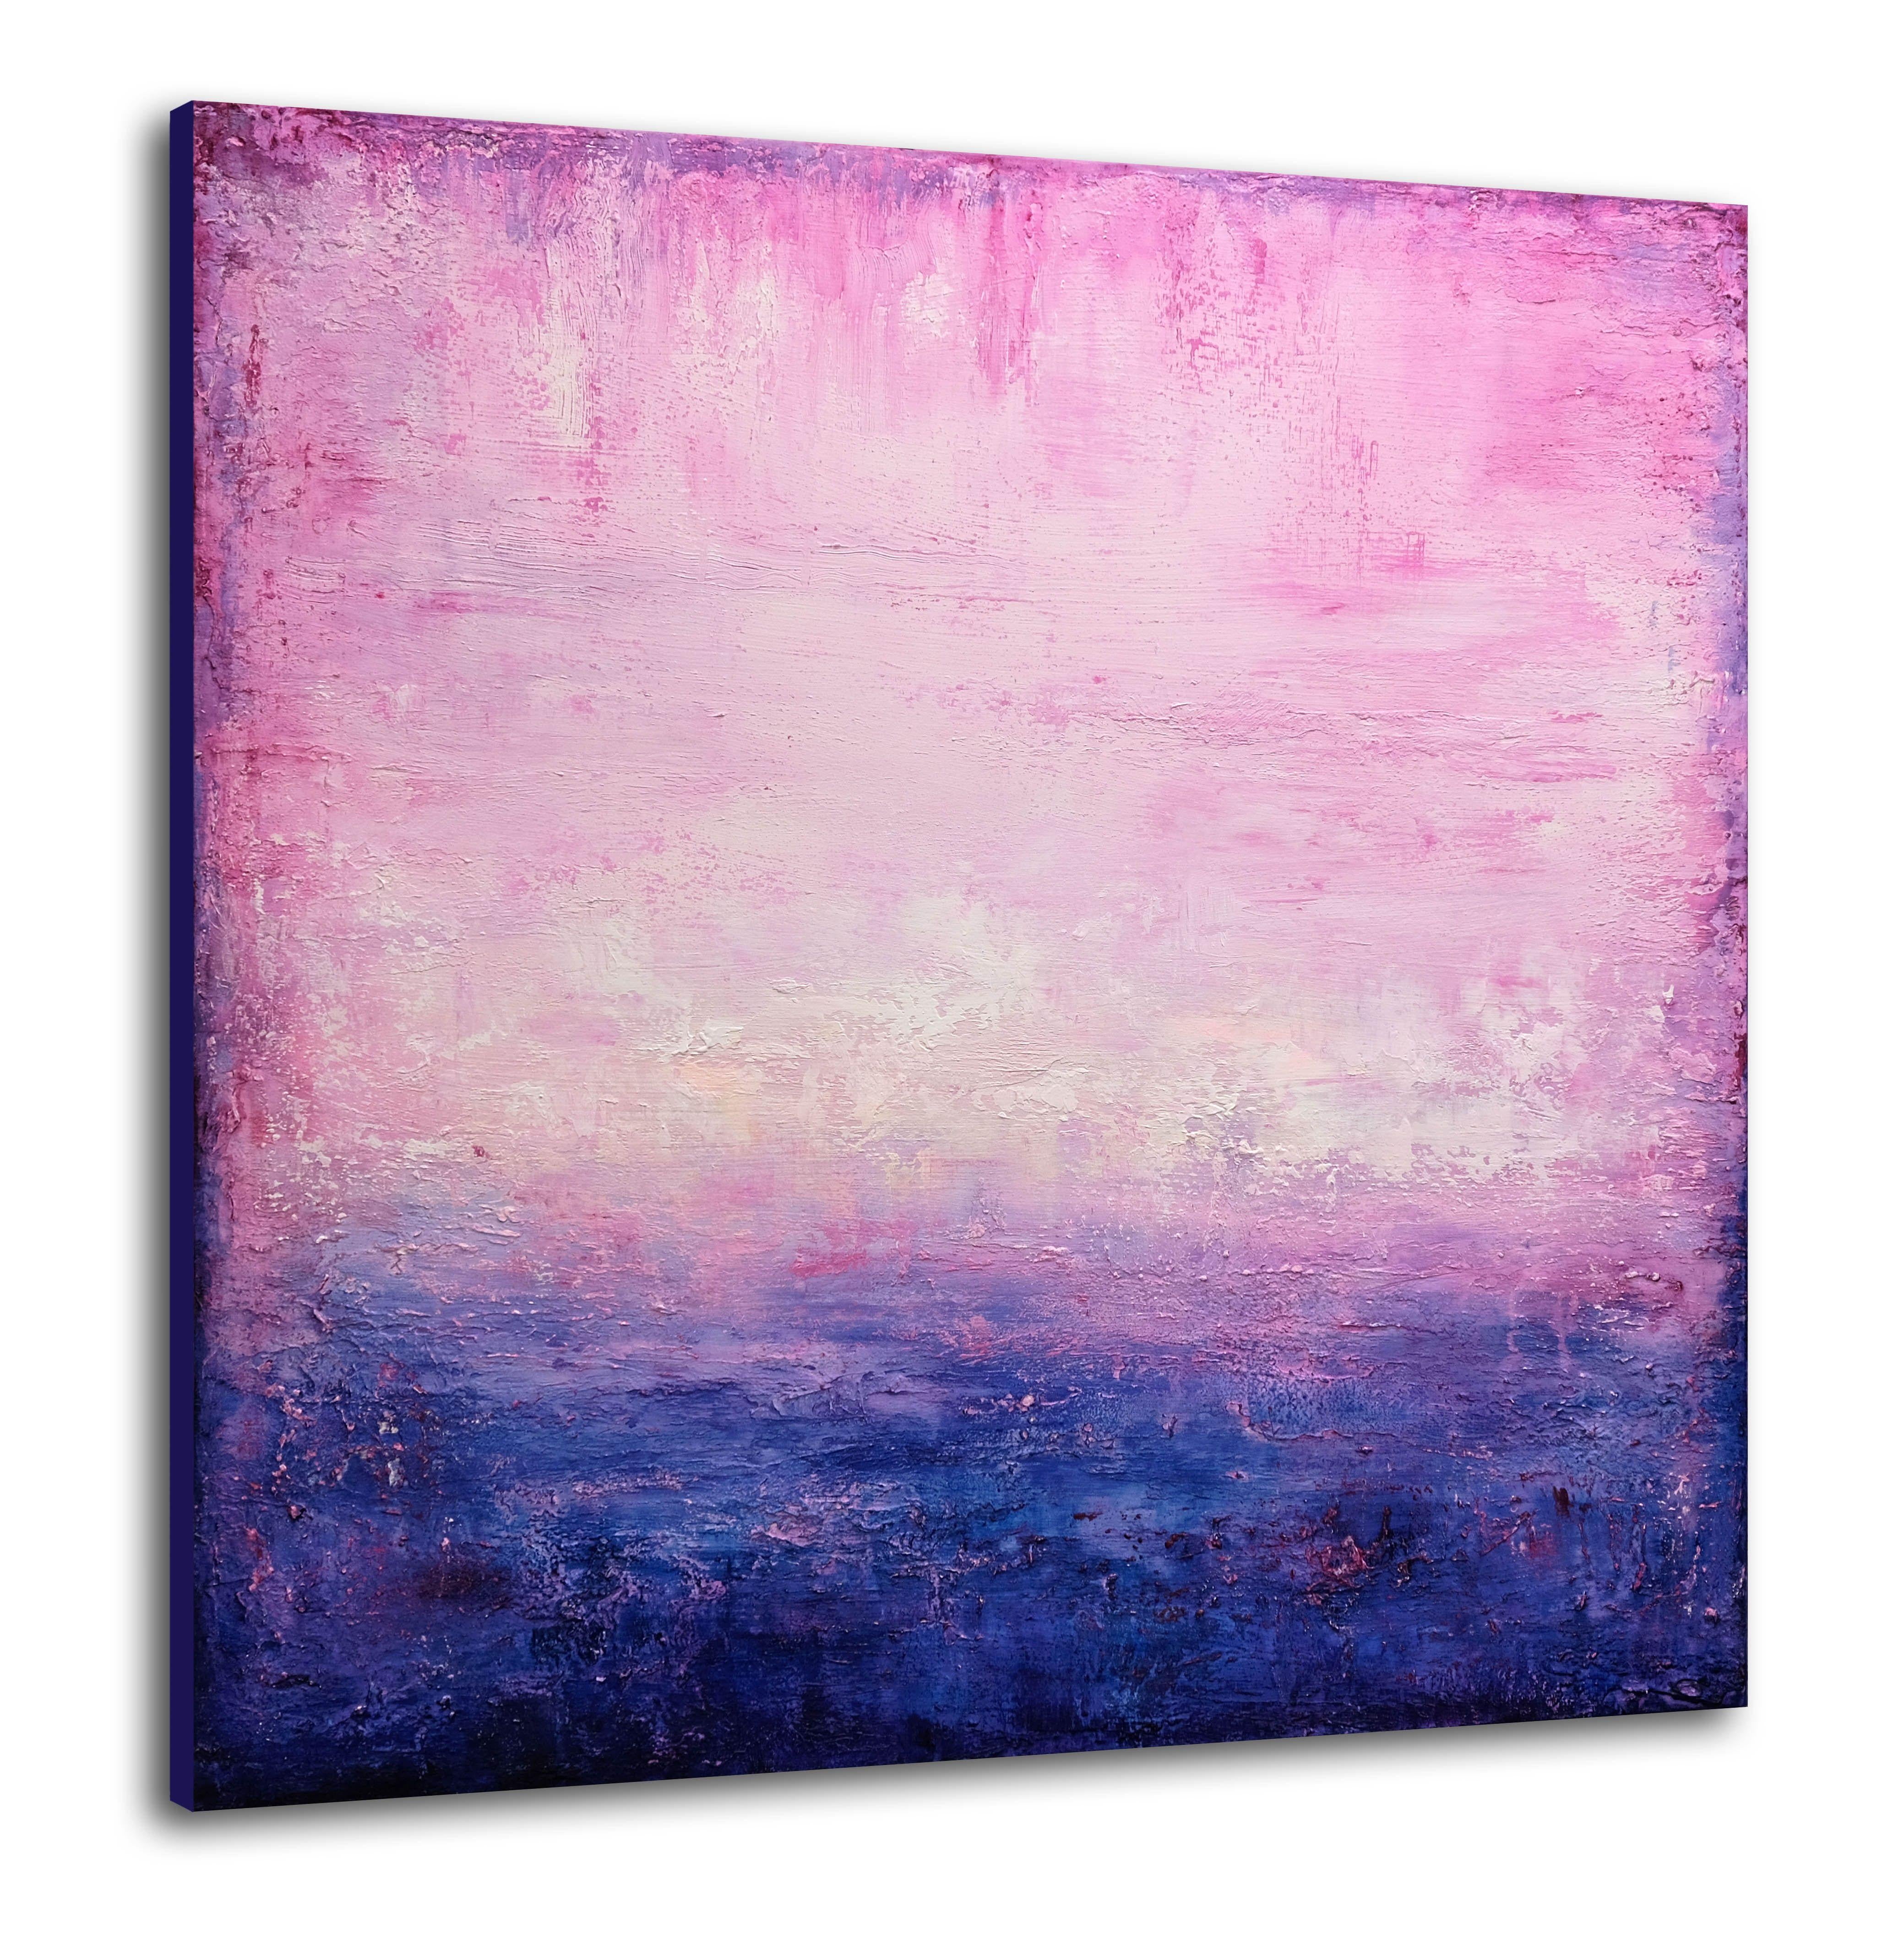 Abstract Sunset III, Painting, Acrylic on Canvas - Purple Abstract Painting by Behshad Arjomandi